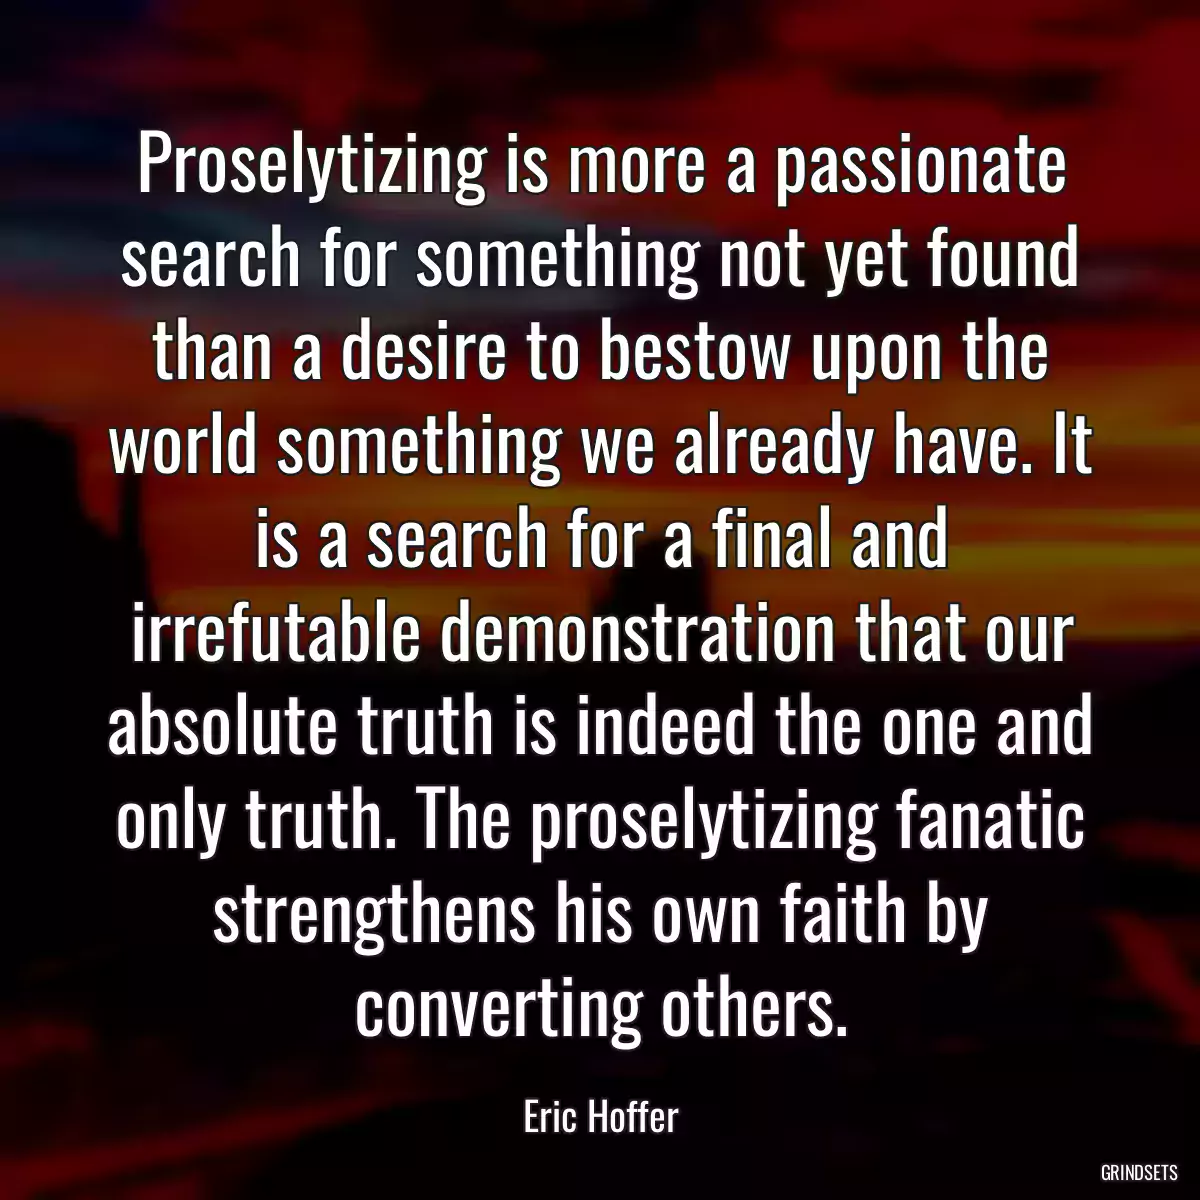 Proselytizing is more a passionate search for something not yet found than a desire to bestow upon the world something we already have. It is a search for a final and irrefutable demonstration that our absolute truth is indeed the one and only truth. The proselytizing fanatic strengthens his own faith by converting others.